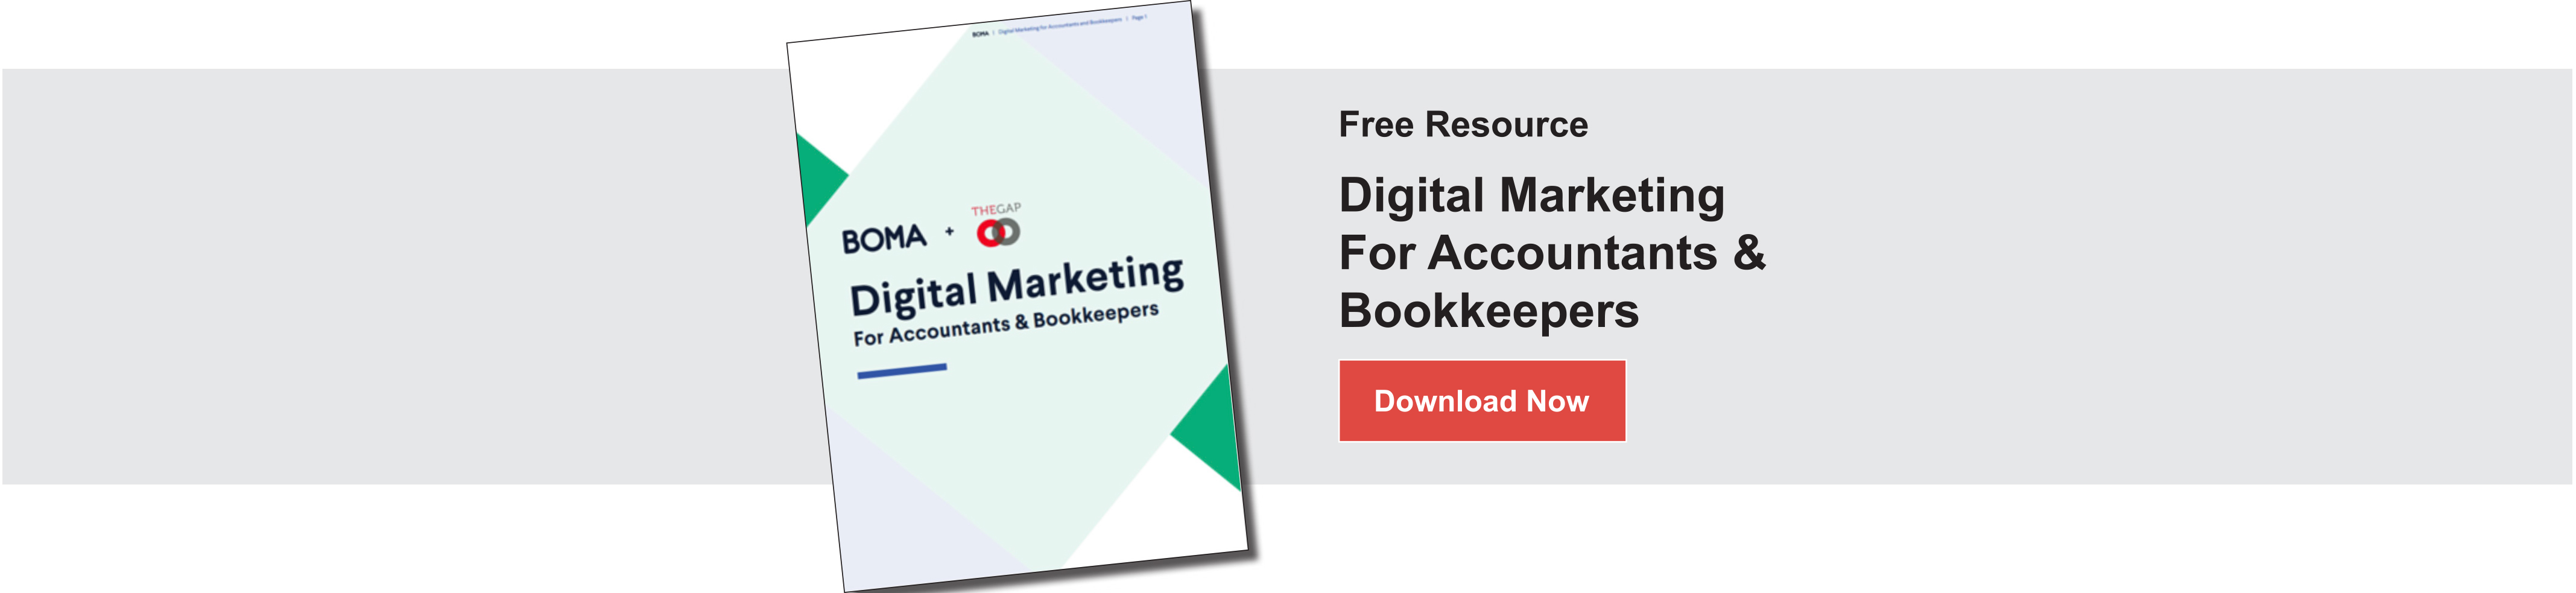 Download our Digital Marketing for Accountants and Bookkeepers Guide